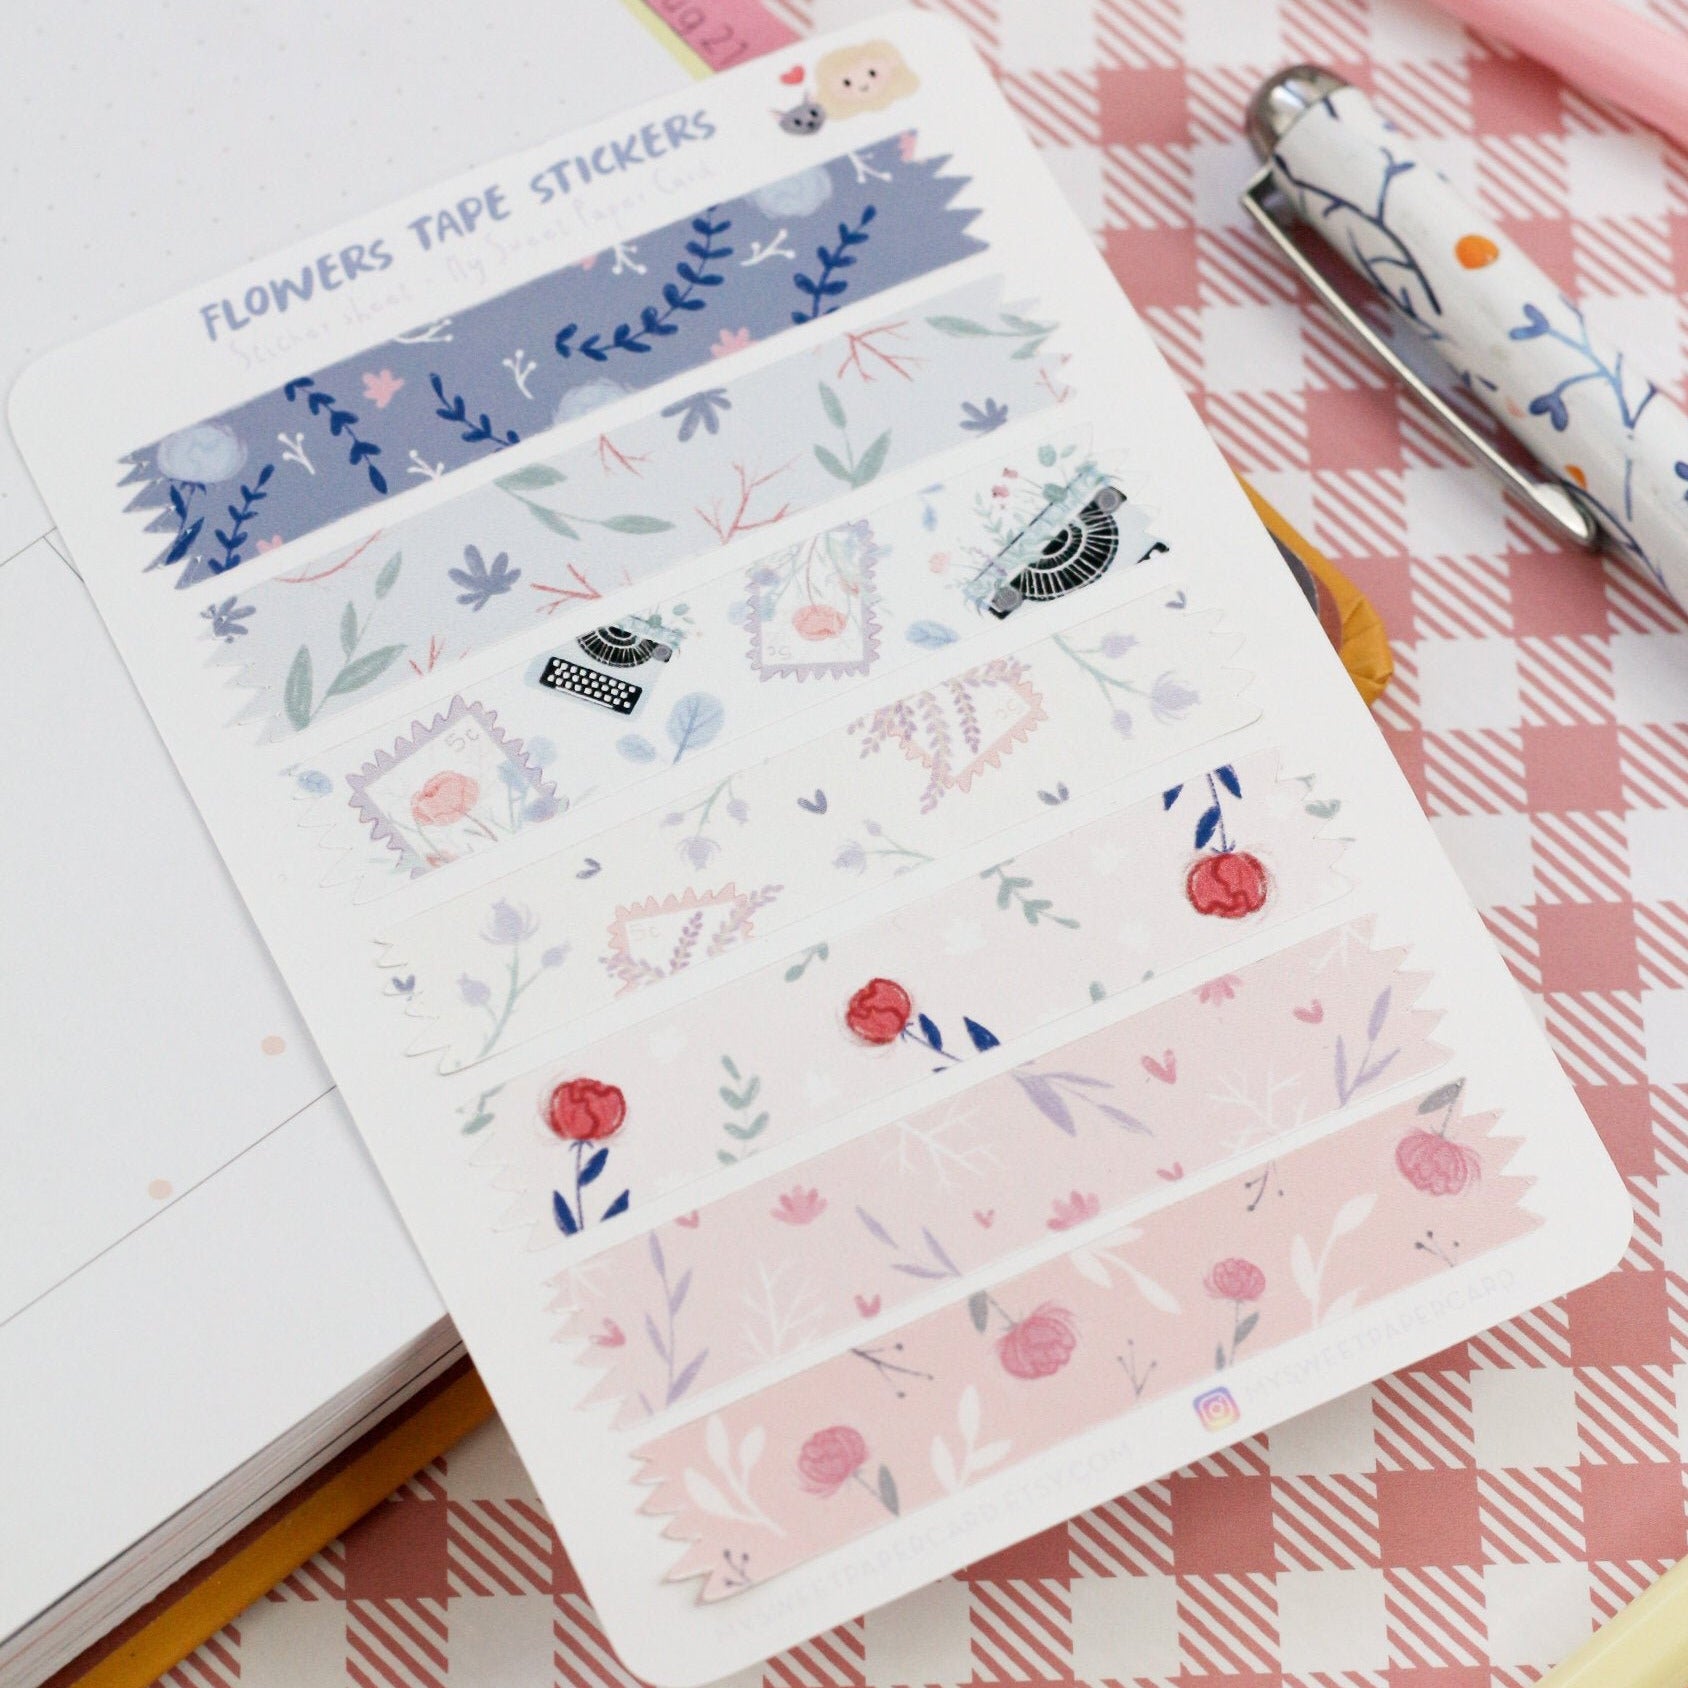 flowers tape stickers